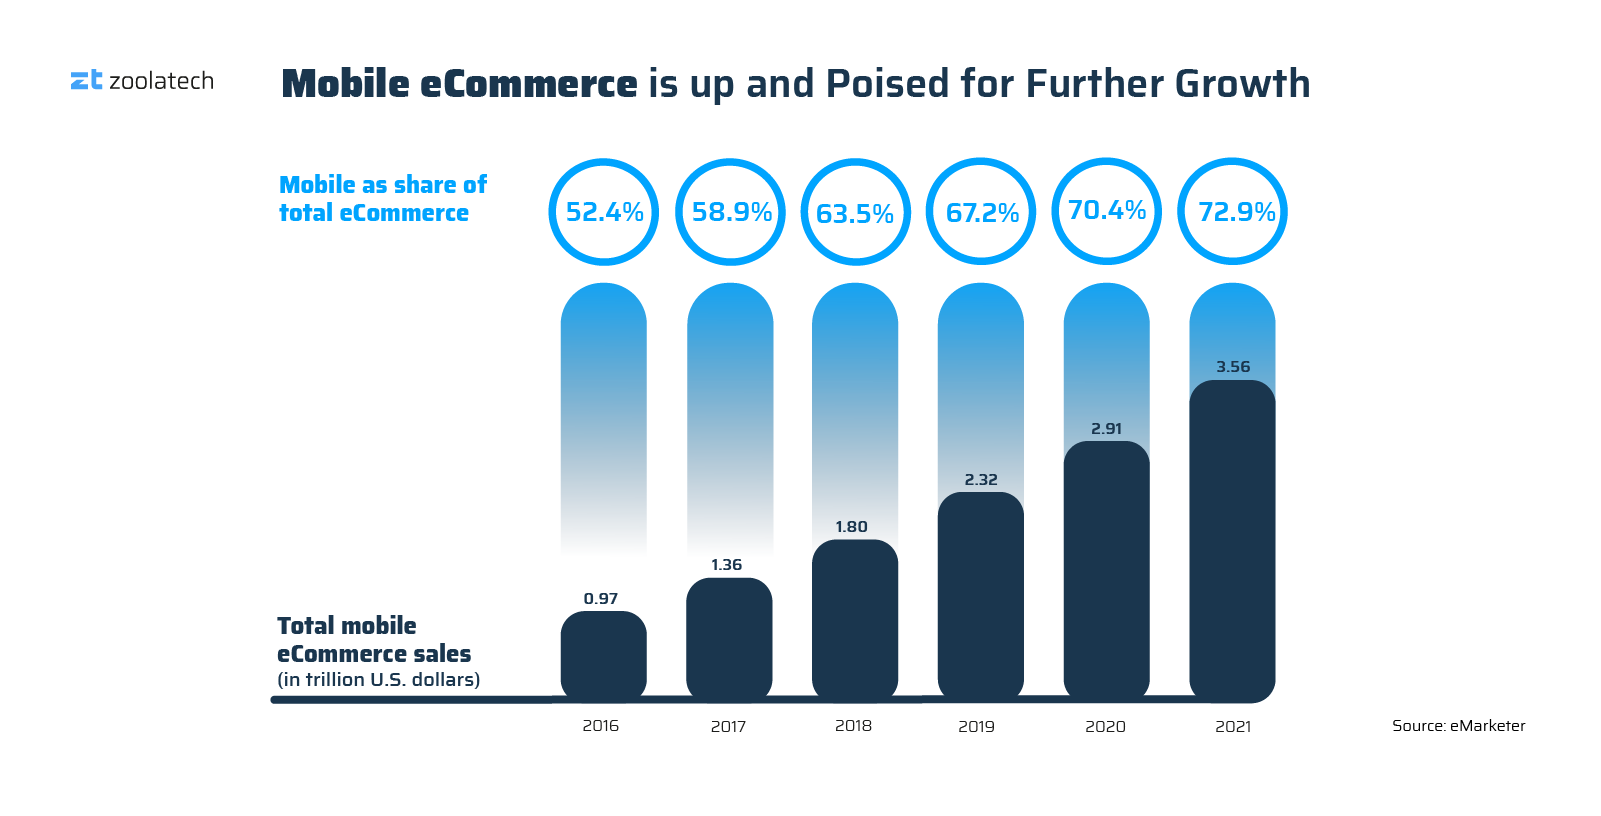 Mobile eCommerce sales